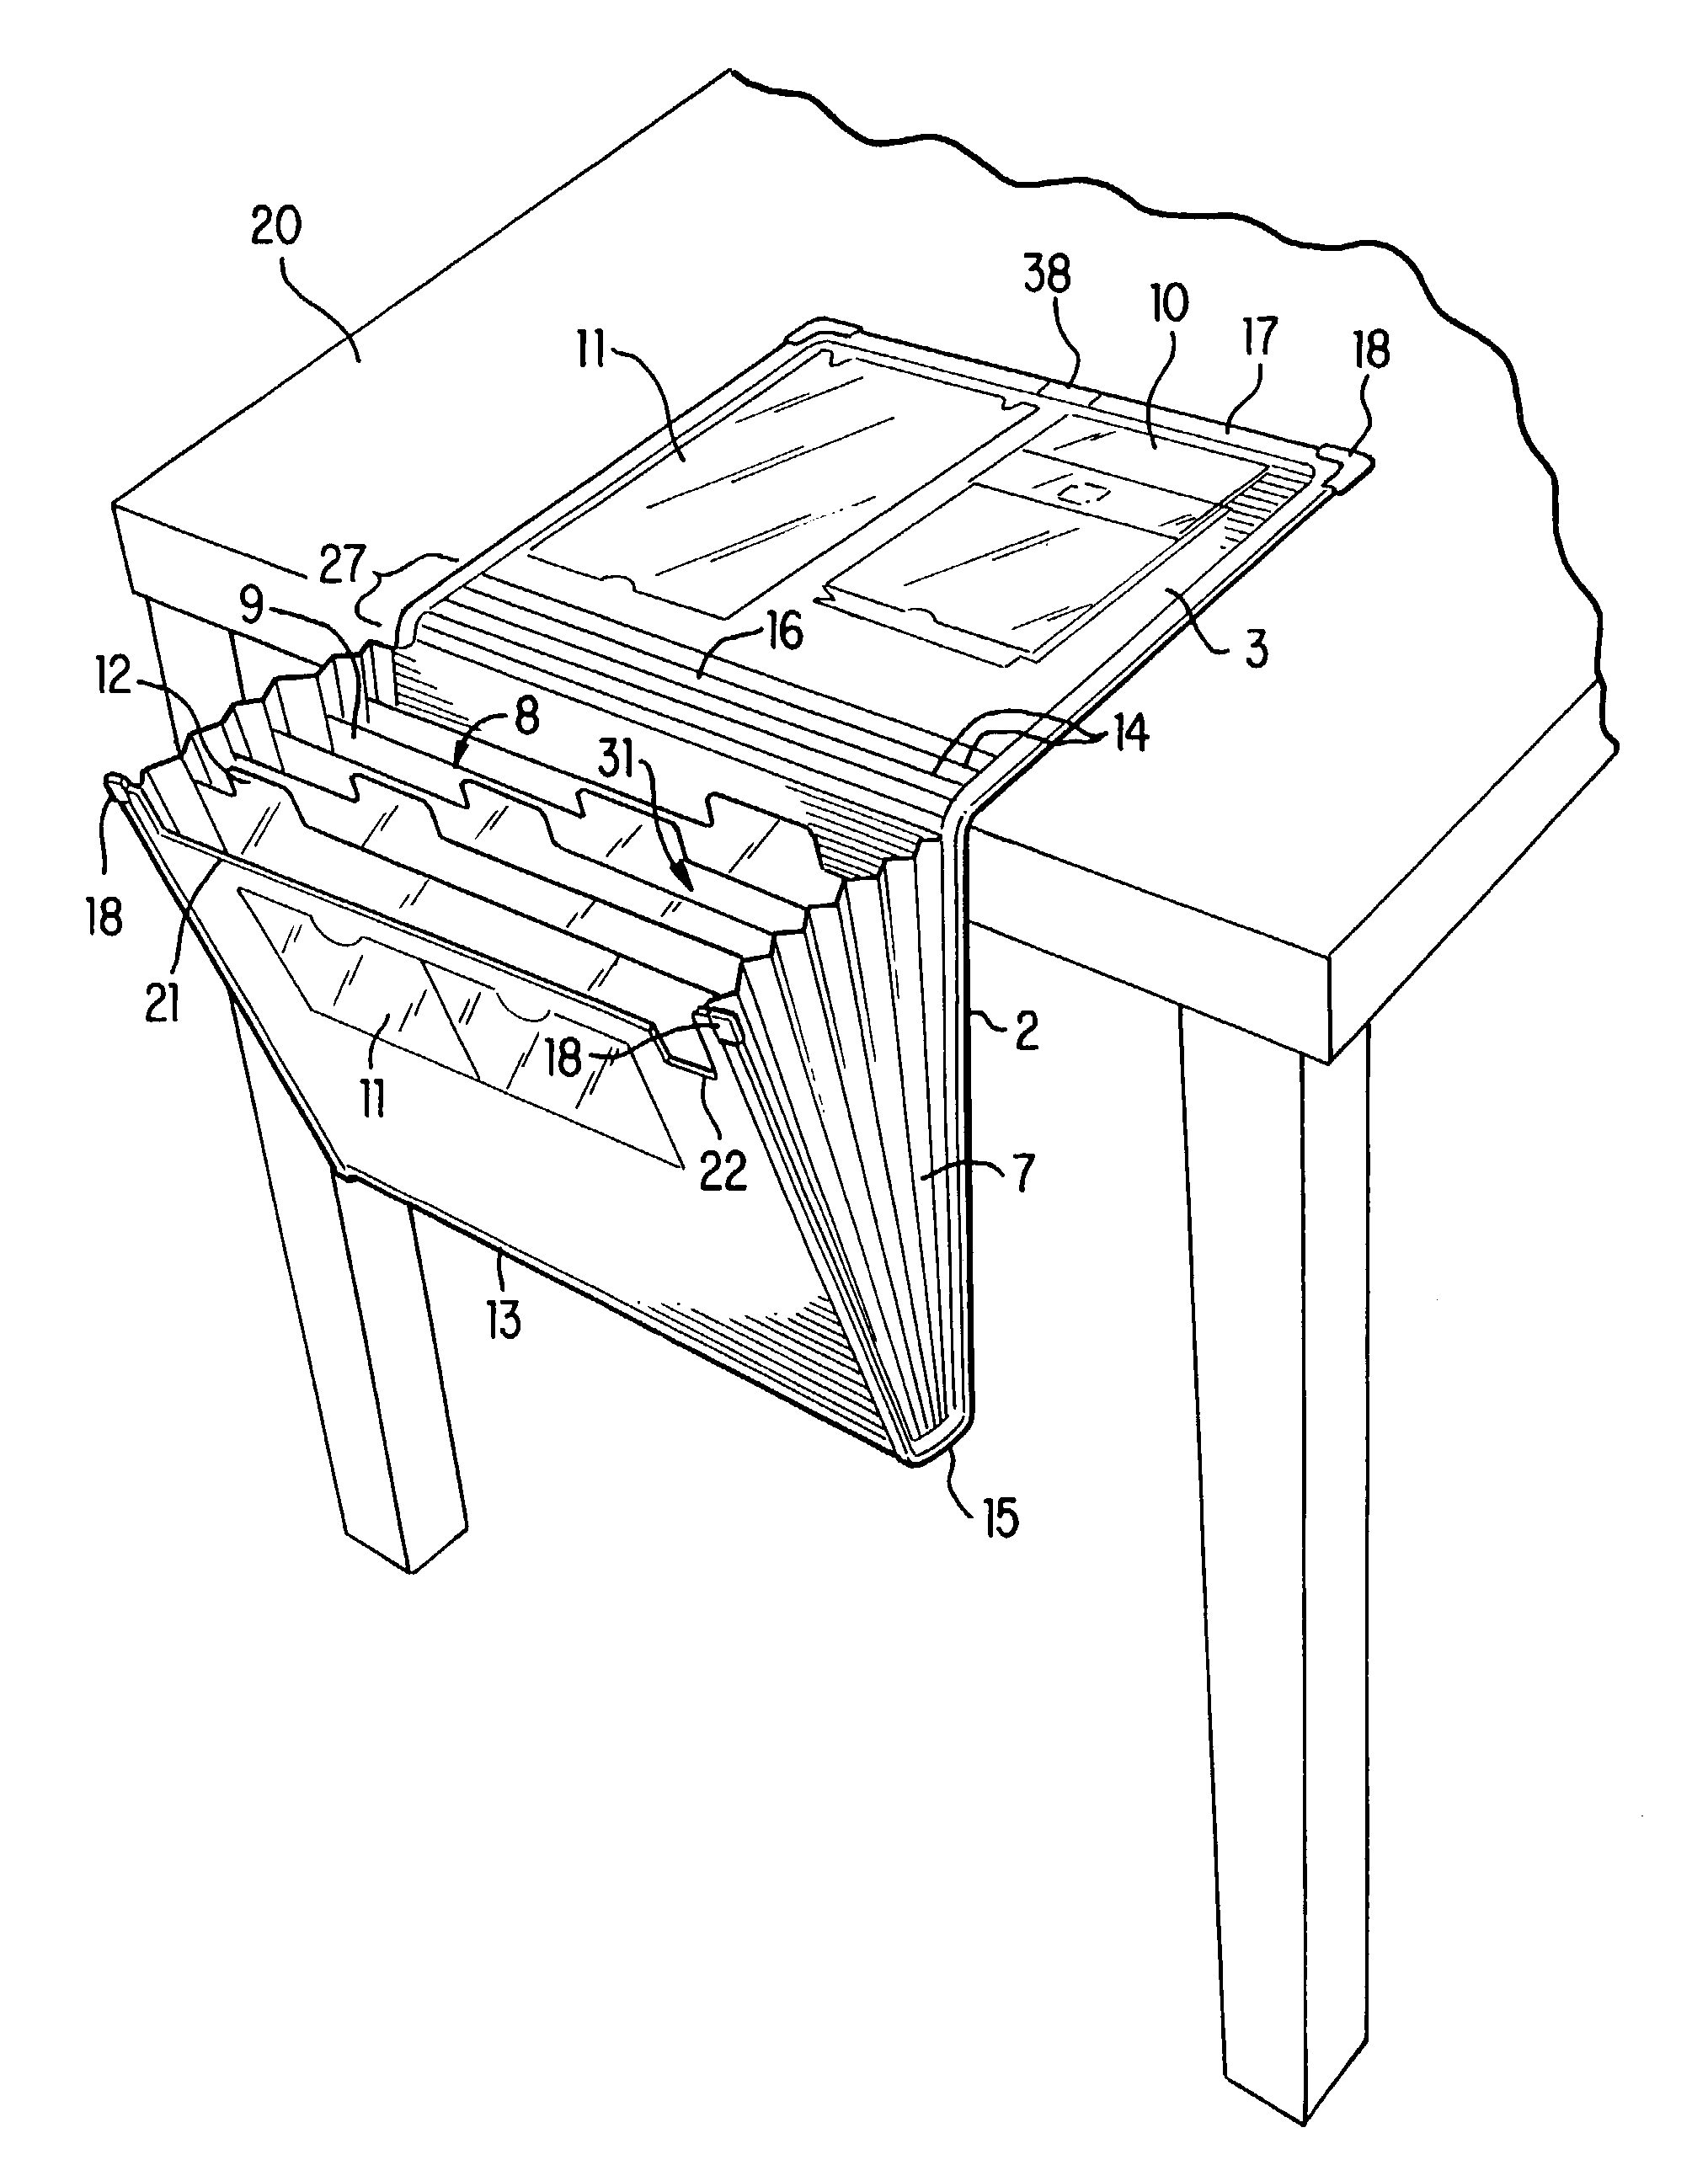 File with high-traction surface